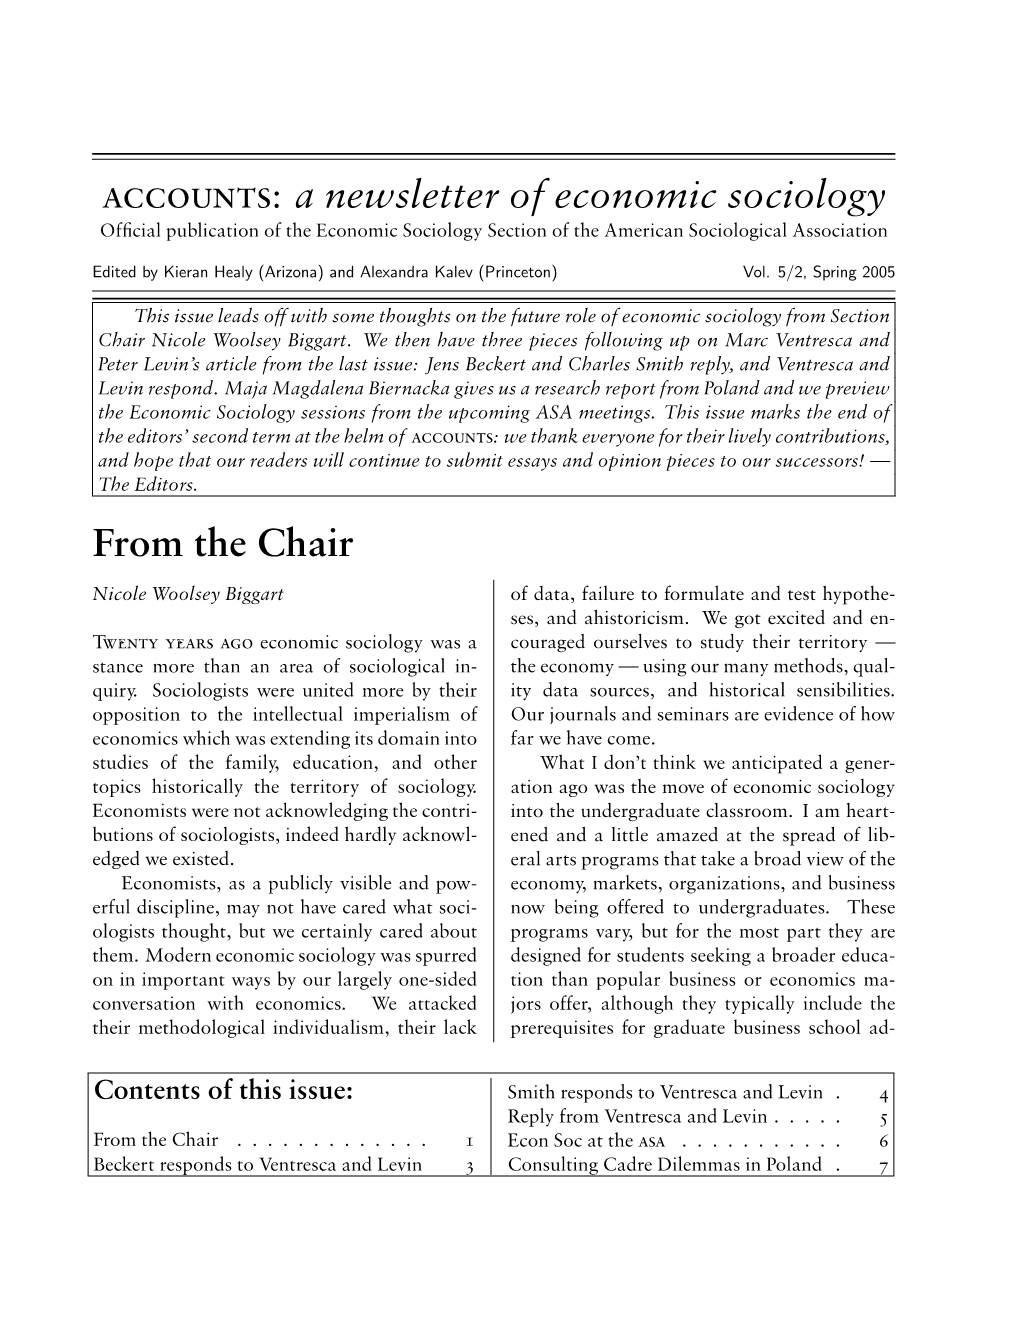 A Newsletter of Economic Sociology from the Chair